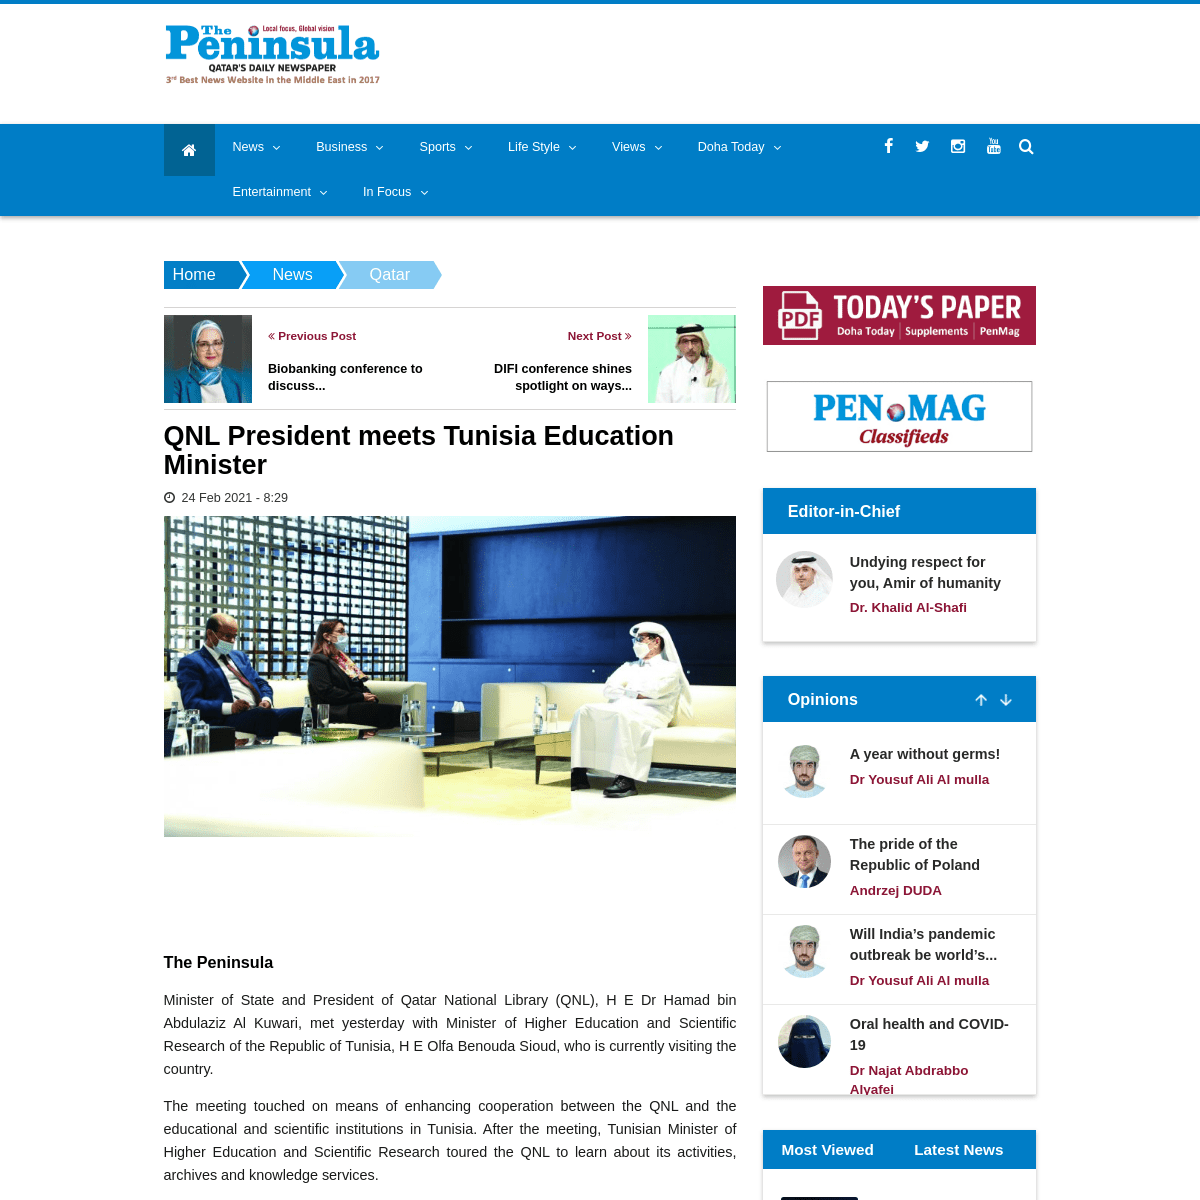 A complete backup of https://www.thepeninsulaqatar.com/article/24/02/2021/QNL-President-meets-Tunisia-Education-Minister